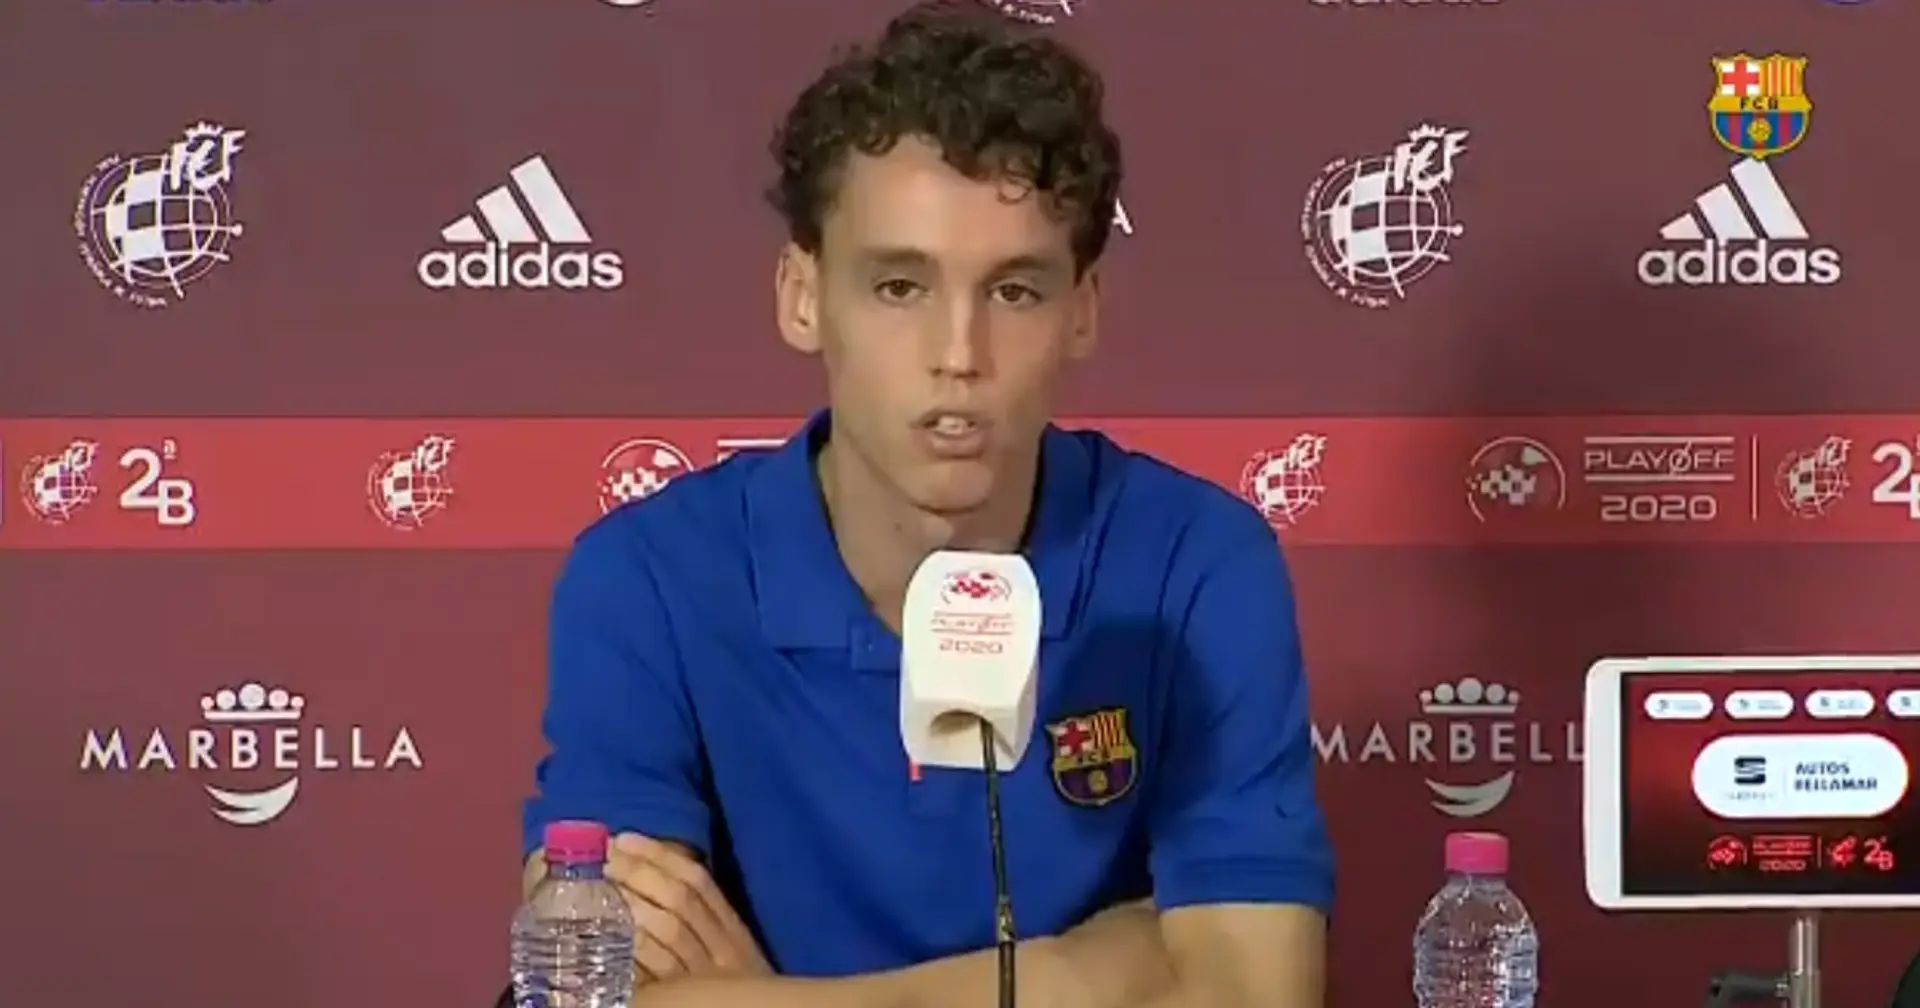 Barca B's Orellana: We know what wearing this badge means. We must give it all to take the team to the highest level